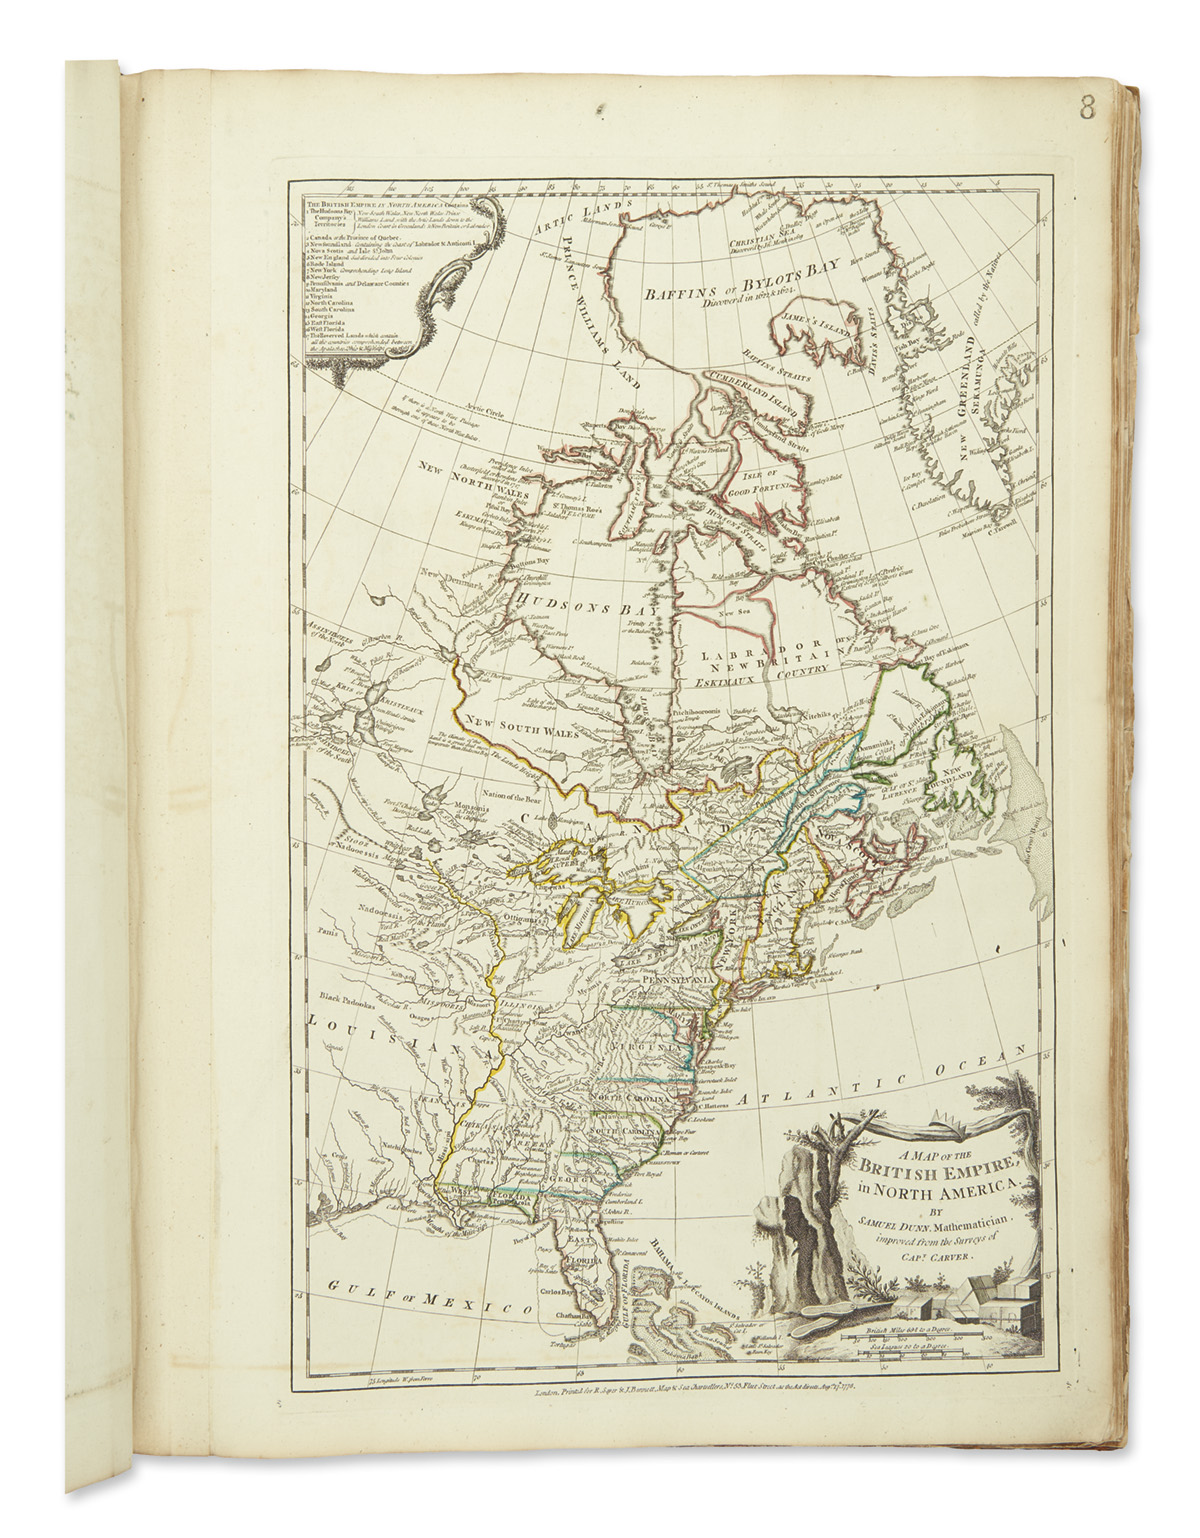 JEFFERYS, THOMAS. The American Atlas: Or, a Geographical Description of the Whole Continent of America.